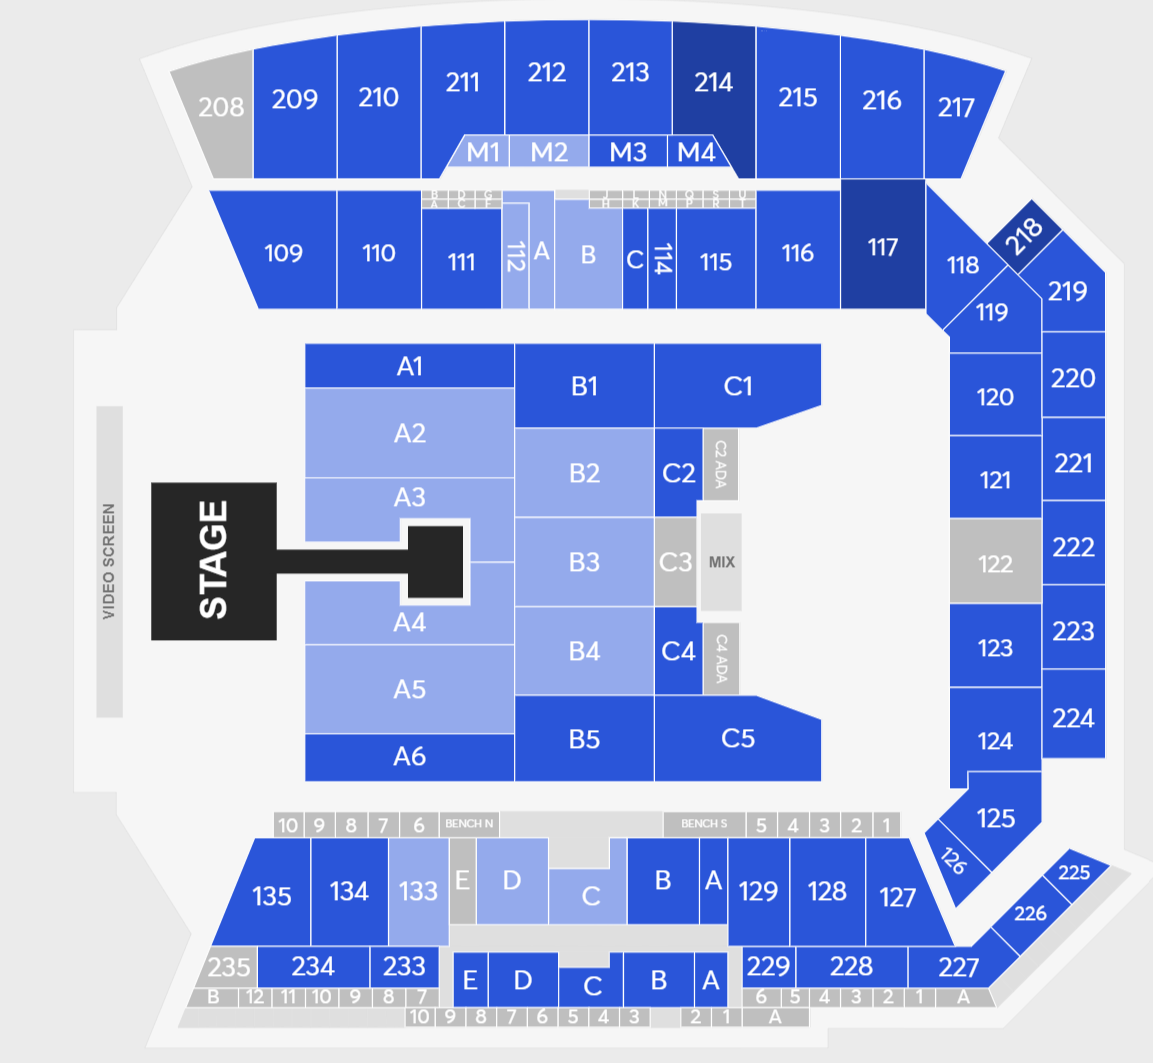 The closest seats to the stage that do not require a presale code are priced at $424